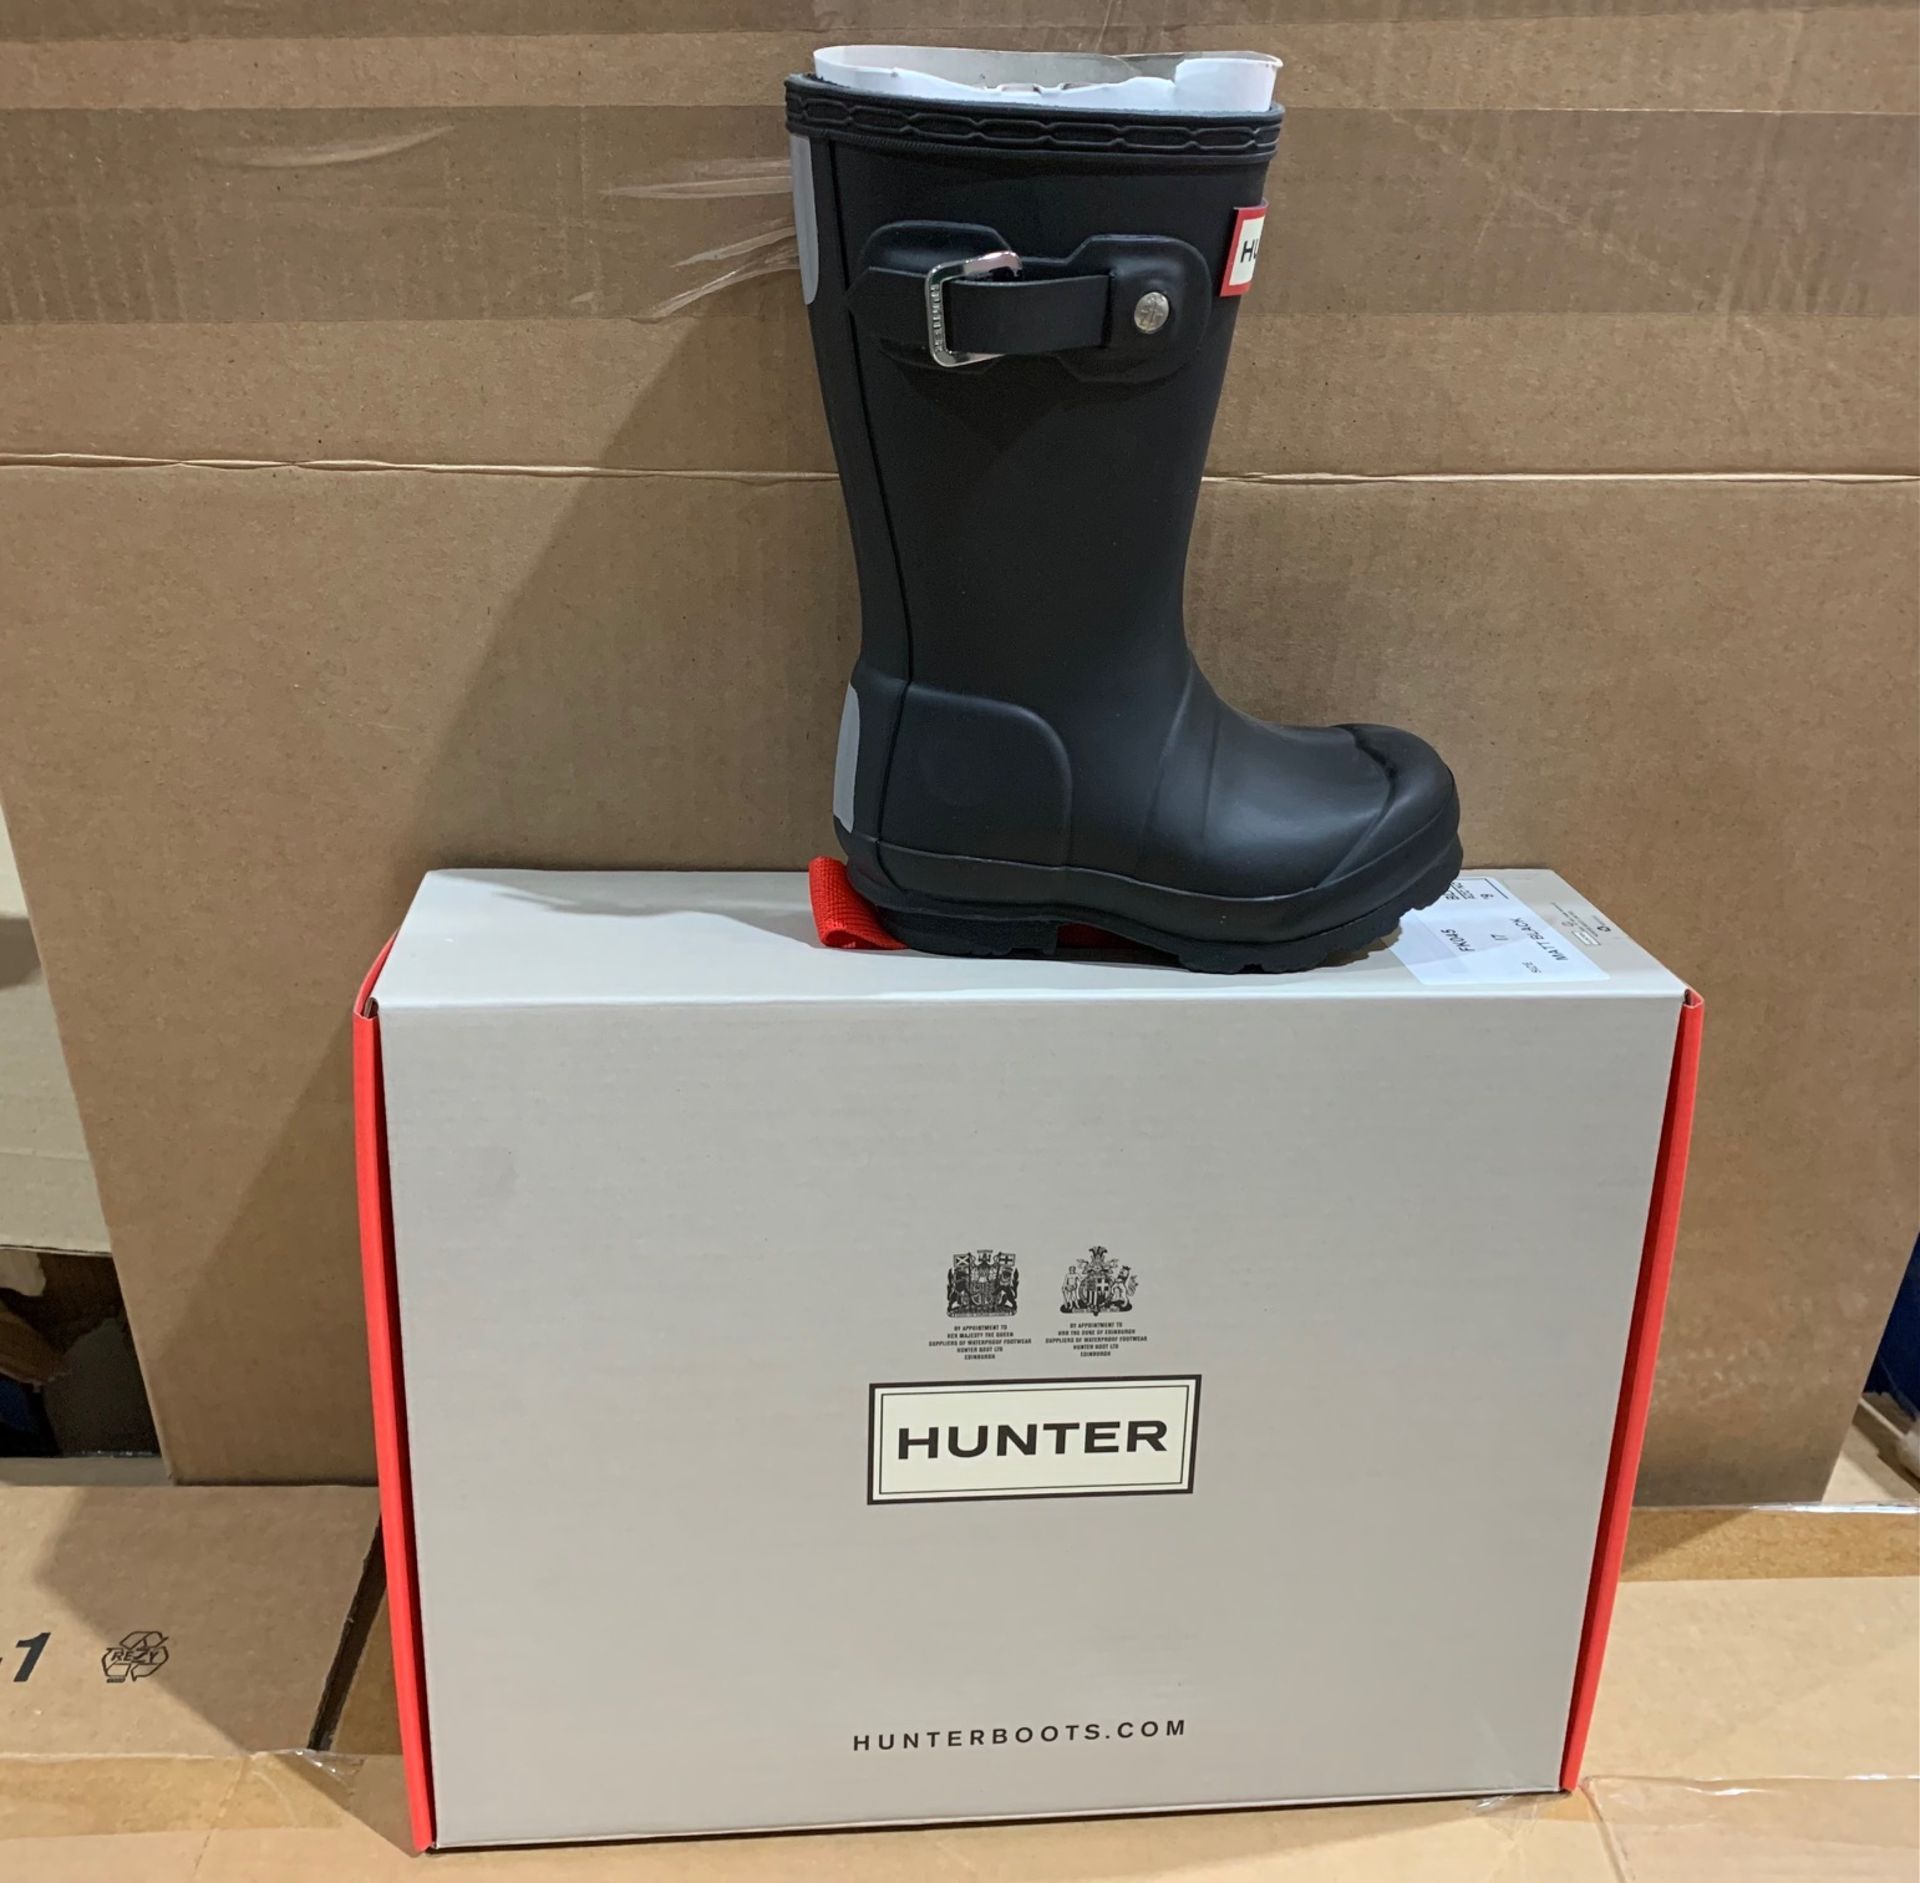 1 X NEW & BOXED HUNTER BOOTS SIZE INFANT 7 (338/20)